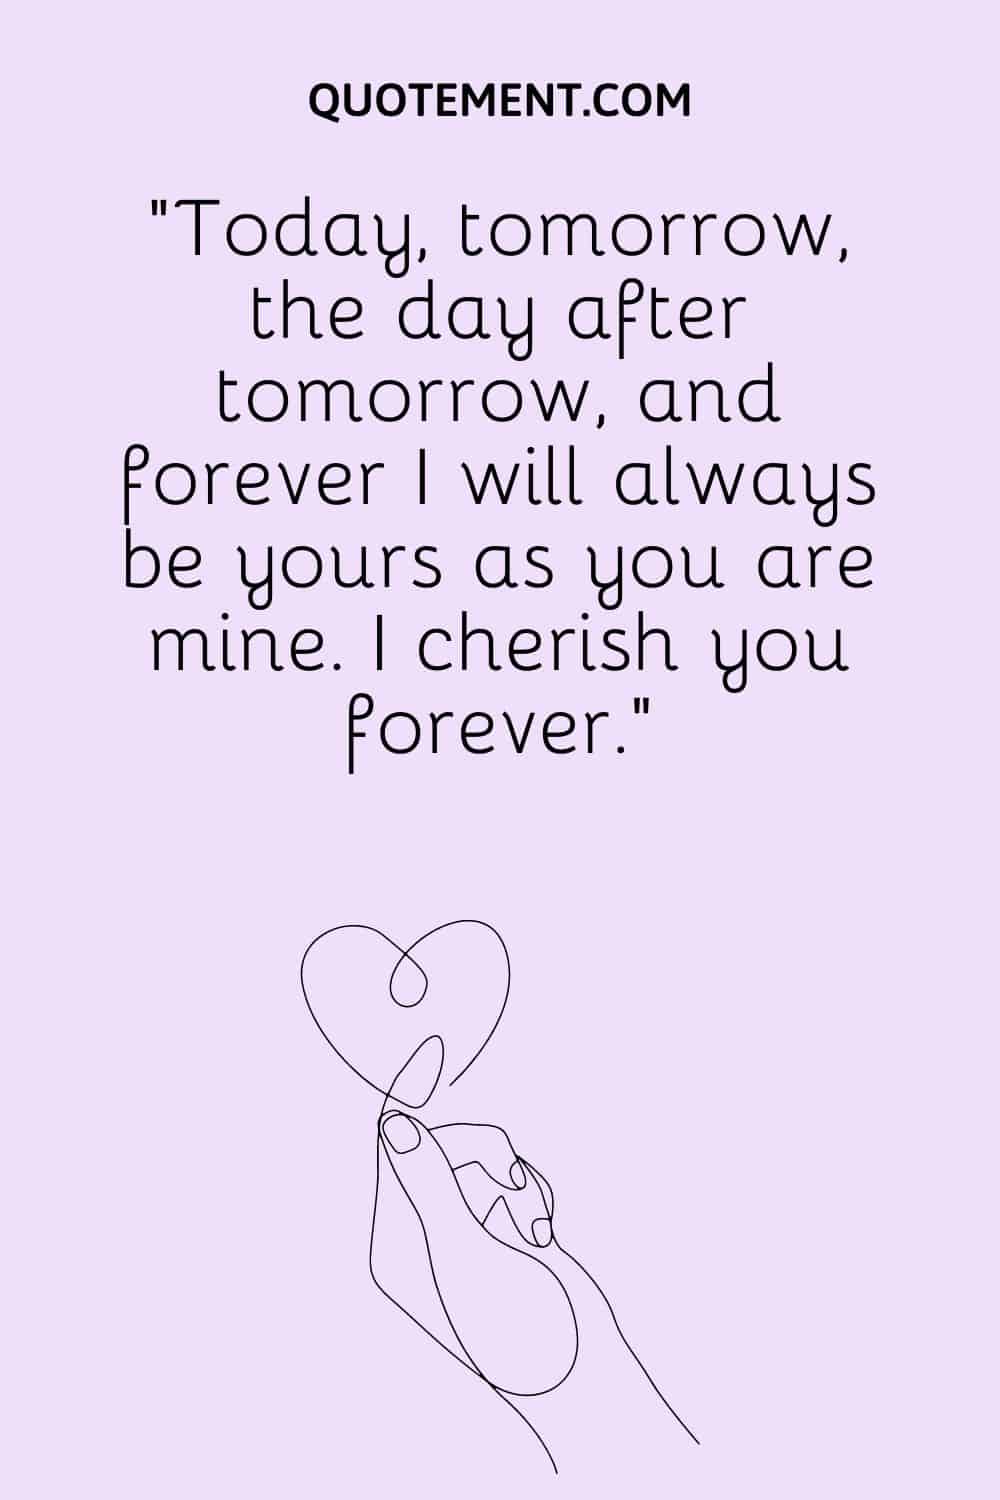 Today, tomorrow, the day after tomorrow, and forever I will always be yours as you are mine.